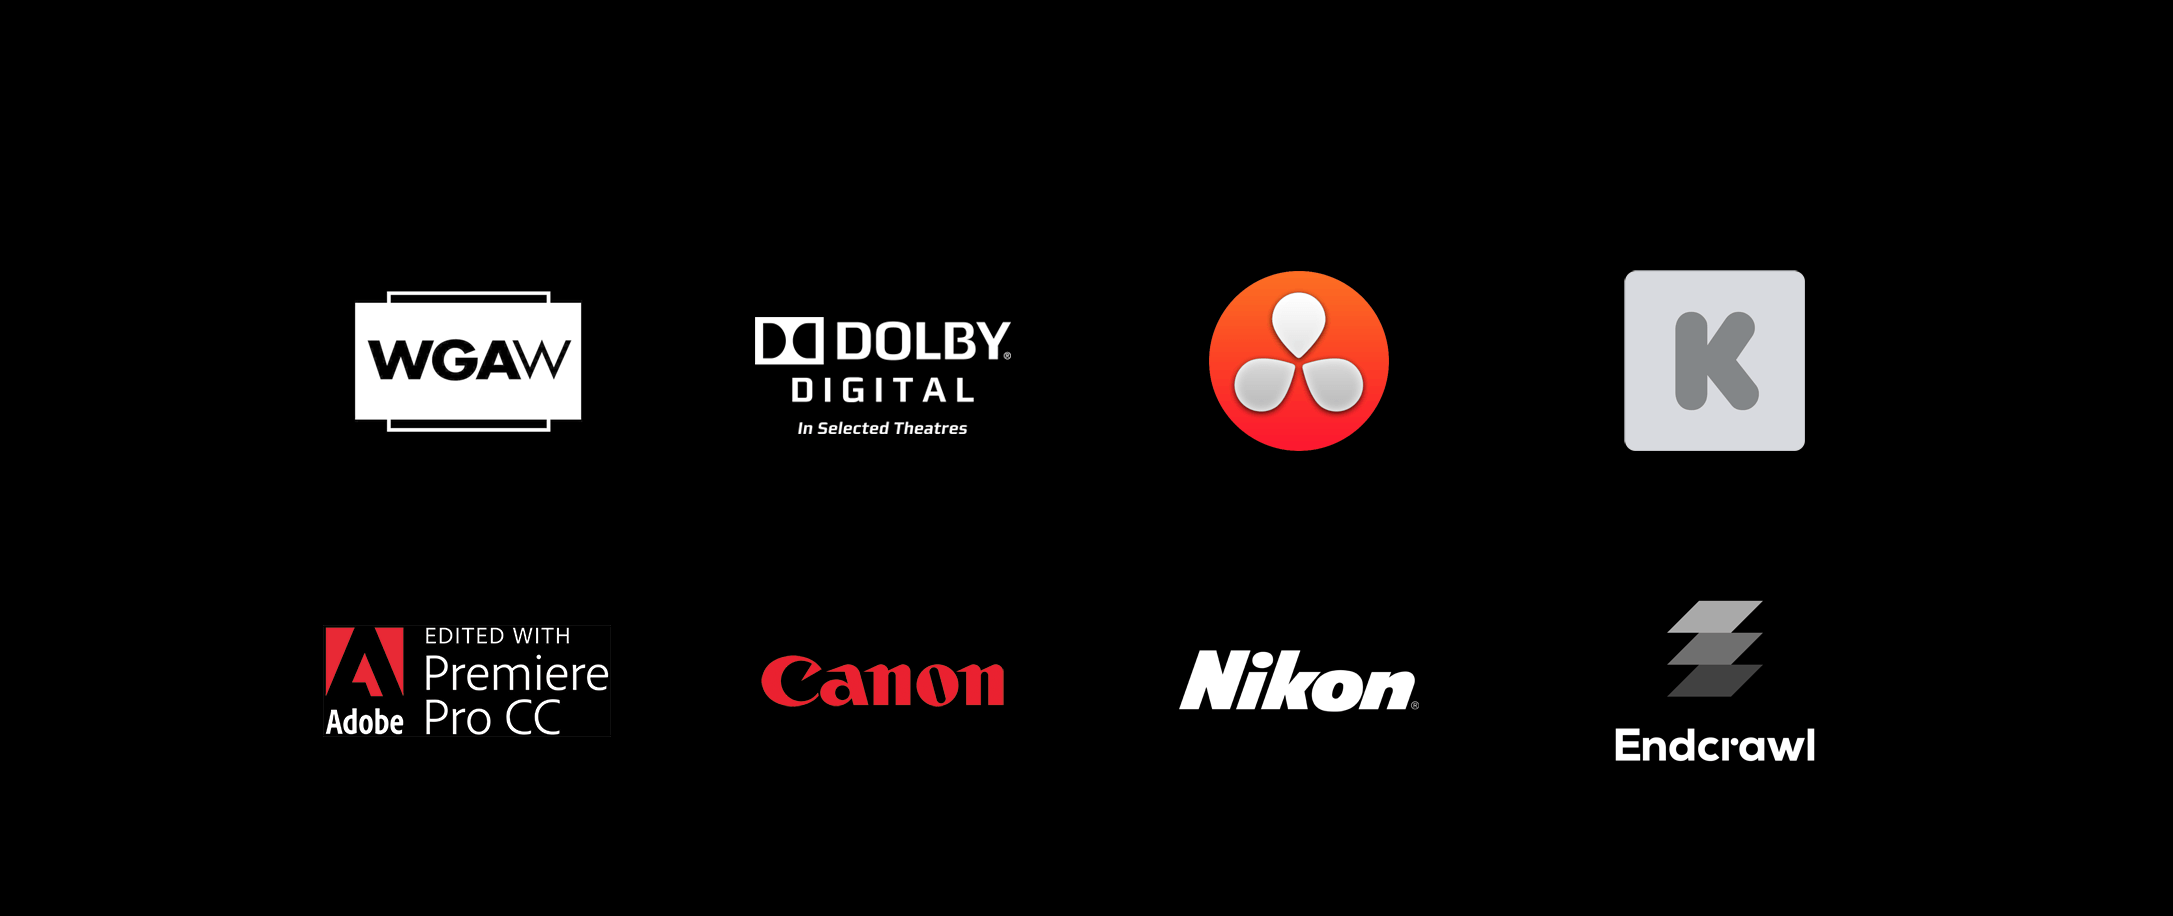 Dolby in Selected Theaters Logo - Shooting an Elephant – Kiyay